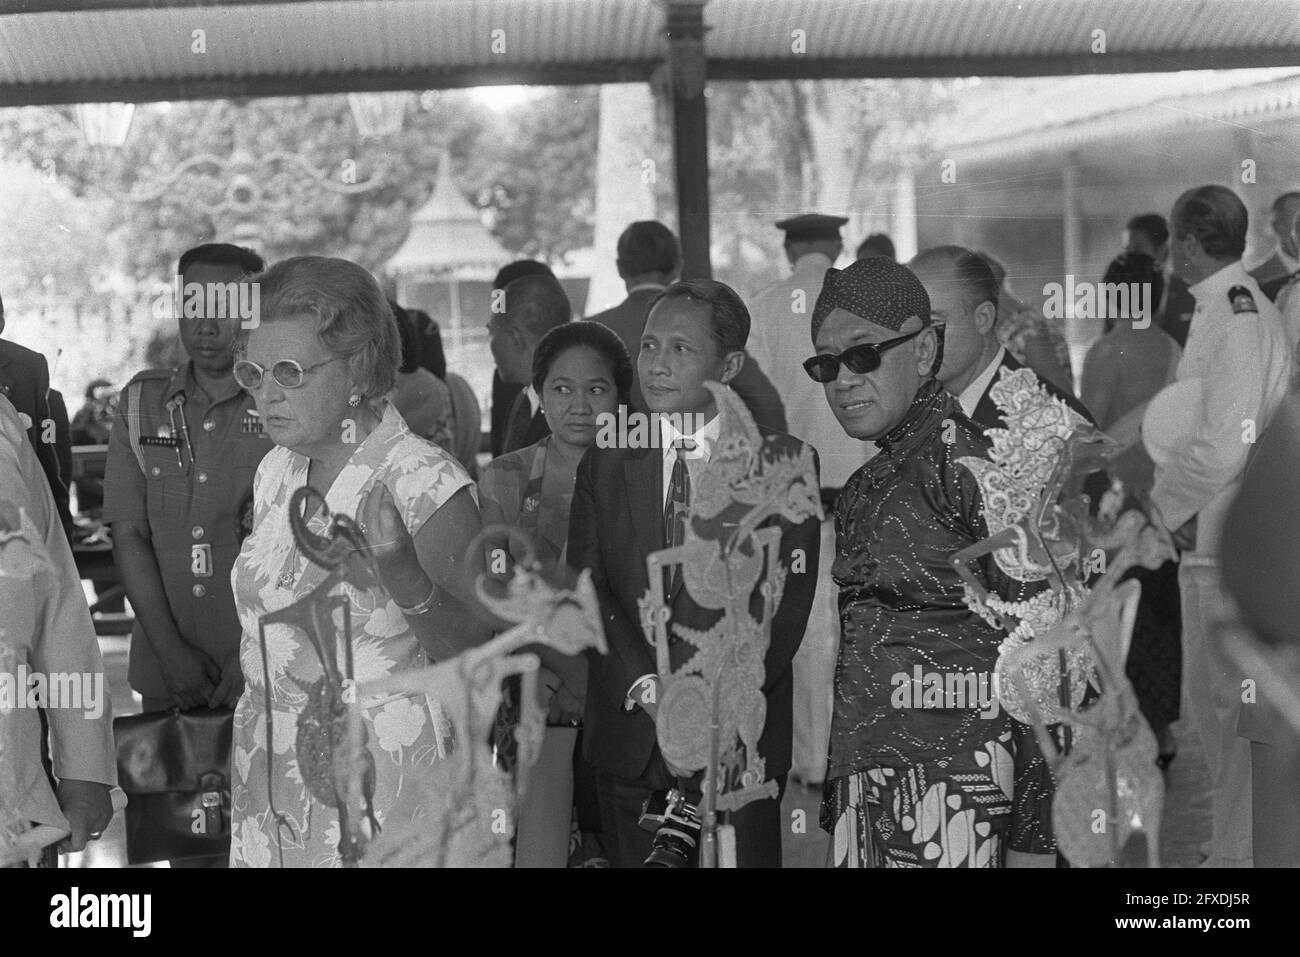 state-visit-to-indonesia-of-hm-and-prince-bernhard-royal-couple-visit-kraton-at-djokjakarta-palace-sultan-hamengku-buwono-september-2-1971-queens-palaces-state-visits-the-netherlands-20th-century-press-agency-photo-news-to-remember-documentary-historic-photography-1945-1990-visual-stories-human-history-of-the-twentieth-century-capturing-moments-in-time-2FXDJ5R.jpg